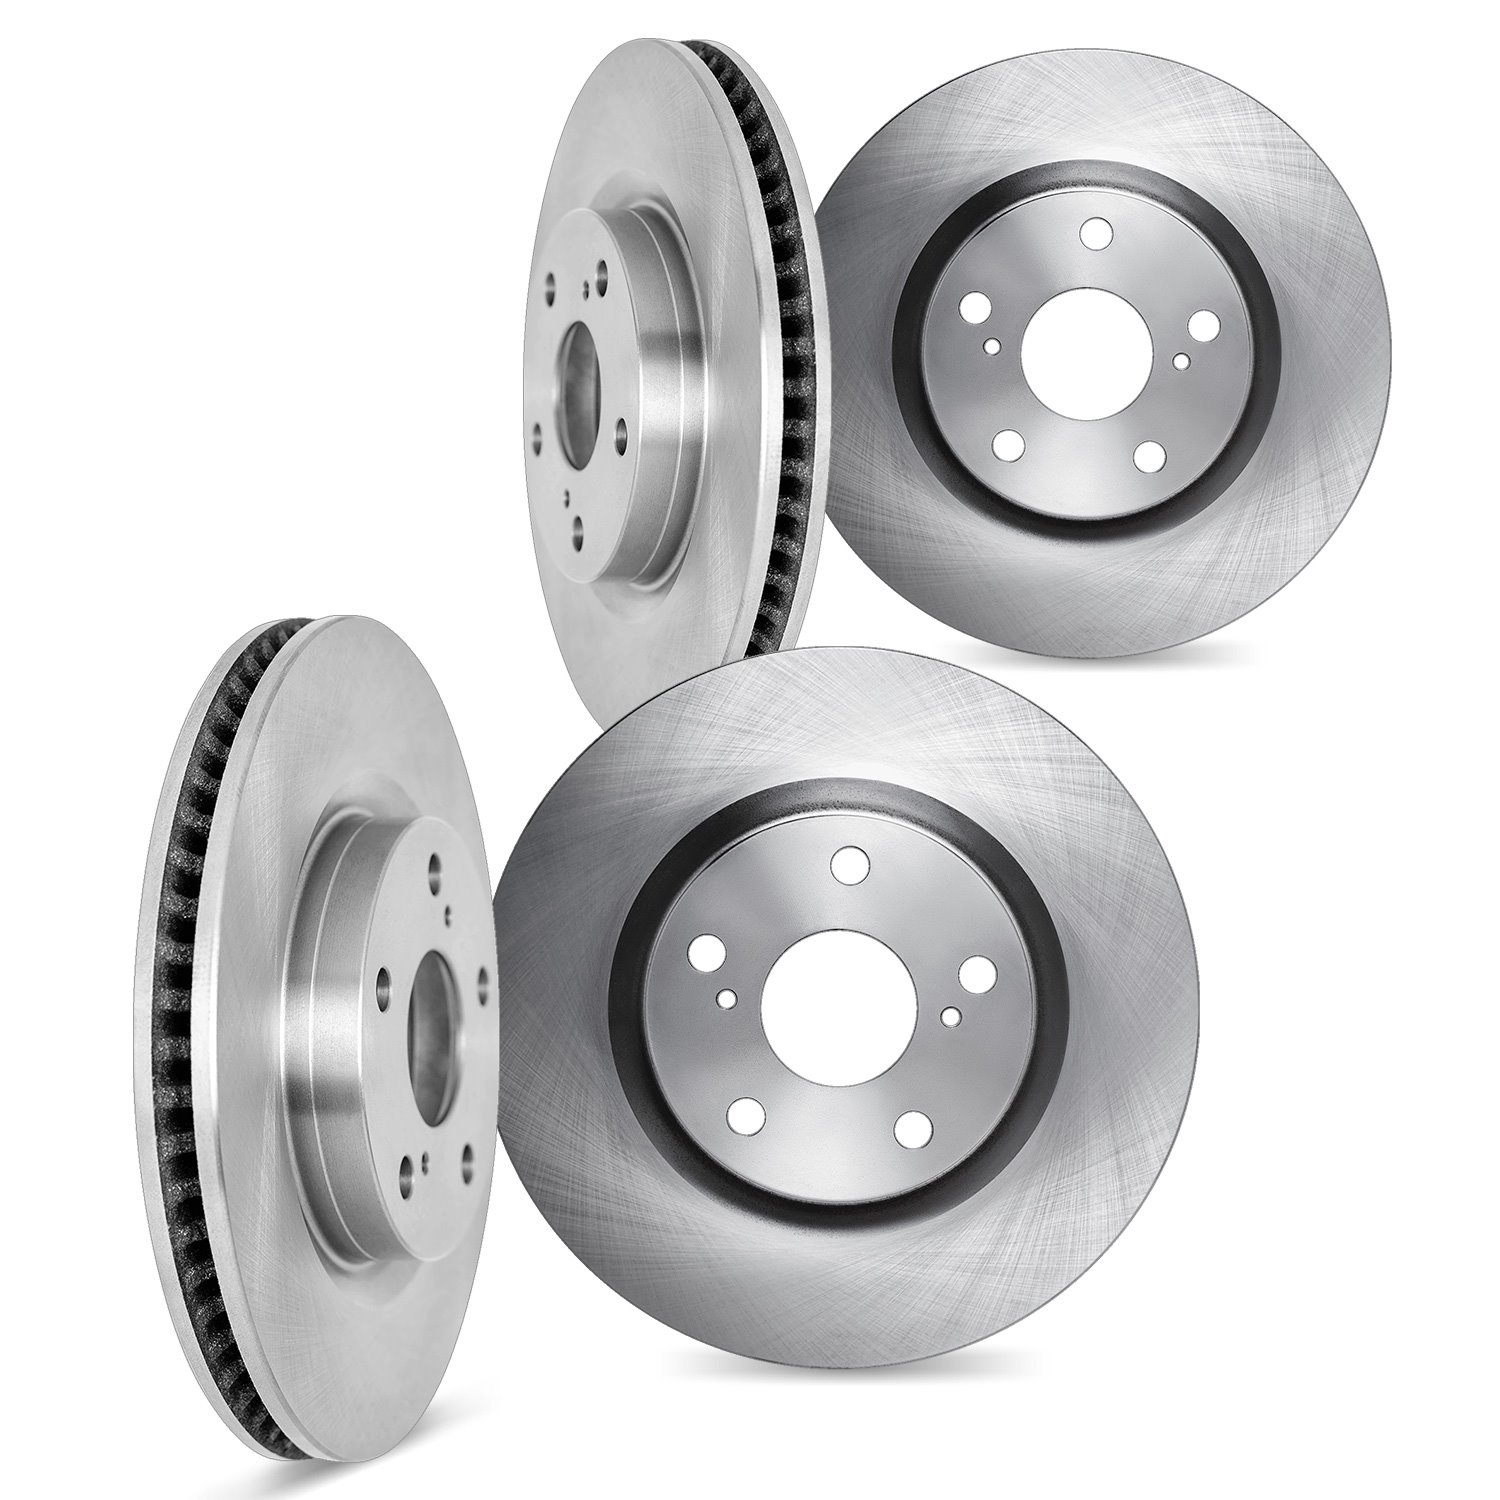 6004-54720 Brake Rotors, Fits Select Ford/Lincoln/Mercury/Mazda, Position: Front and Rear